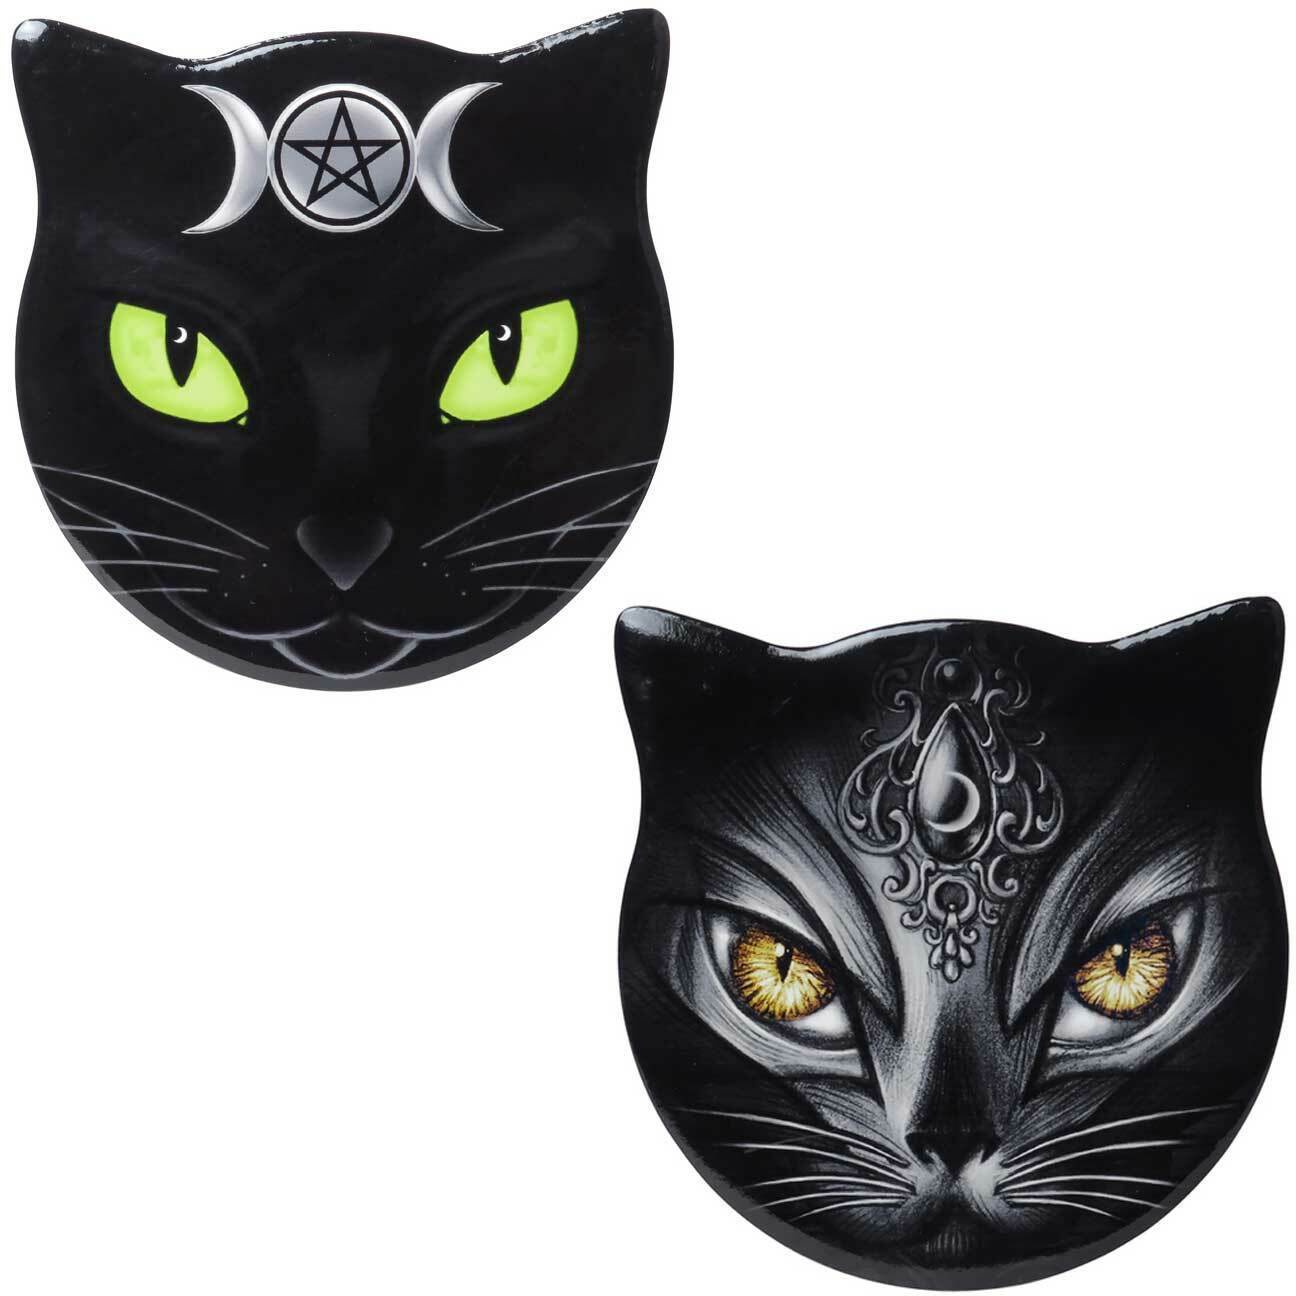 Primary image for Alchemy Gothic Triple Moon Sacred Black Cat Witchy Ceramic Coasters CC16 CC17